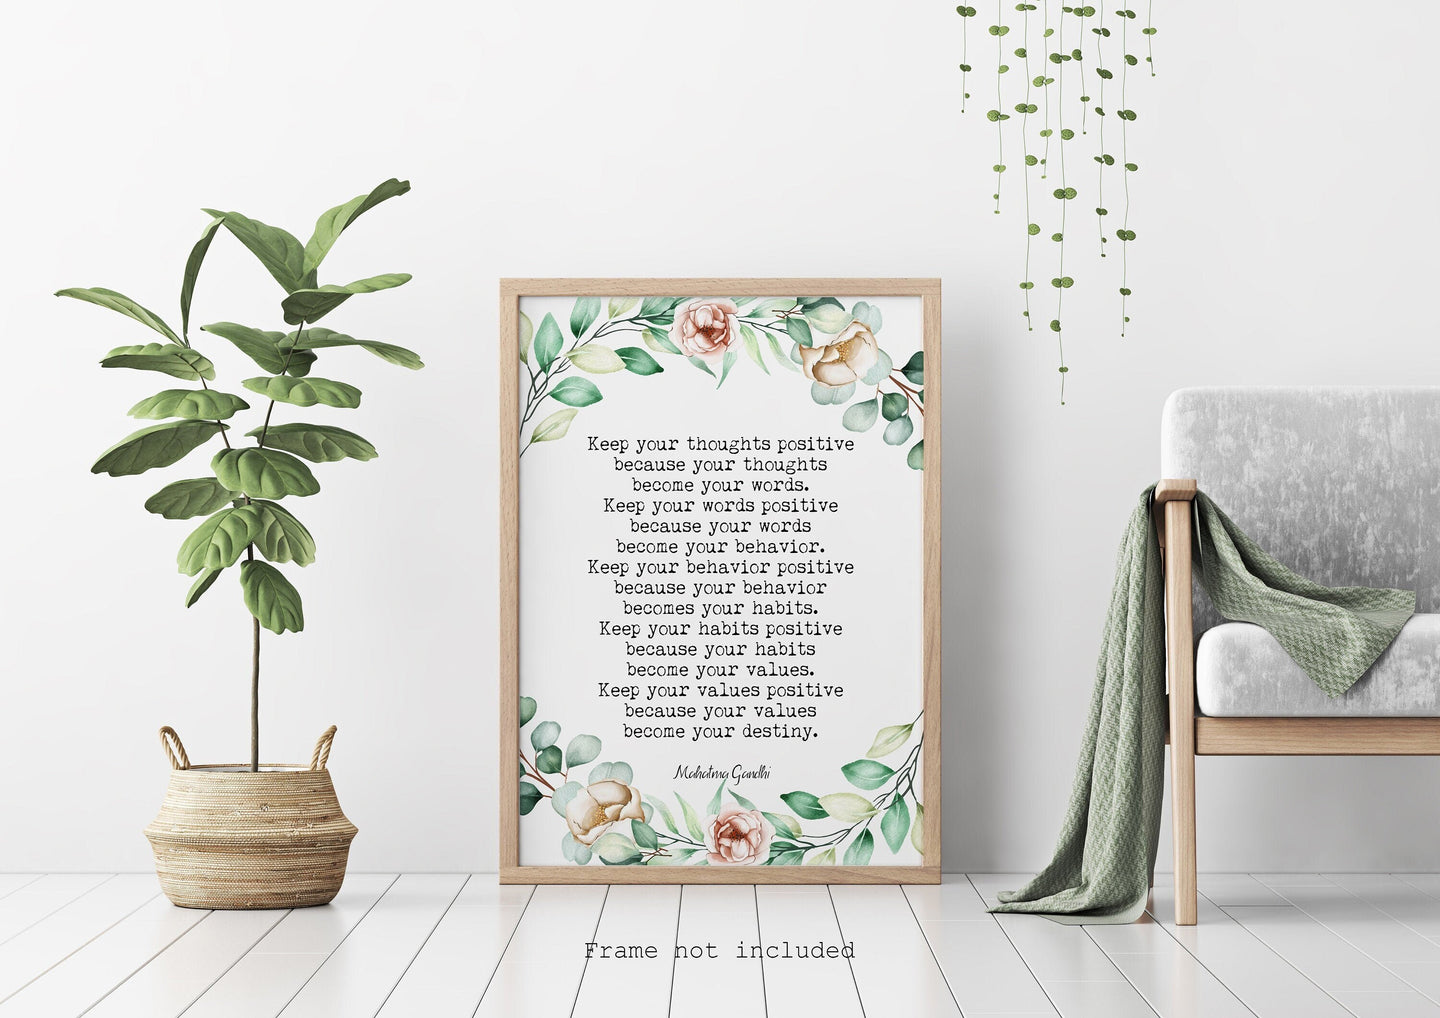 Gandhi quote Wall art print - office decor home decor poster